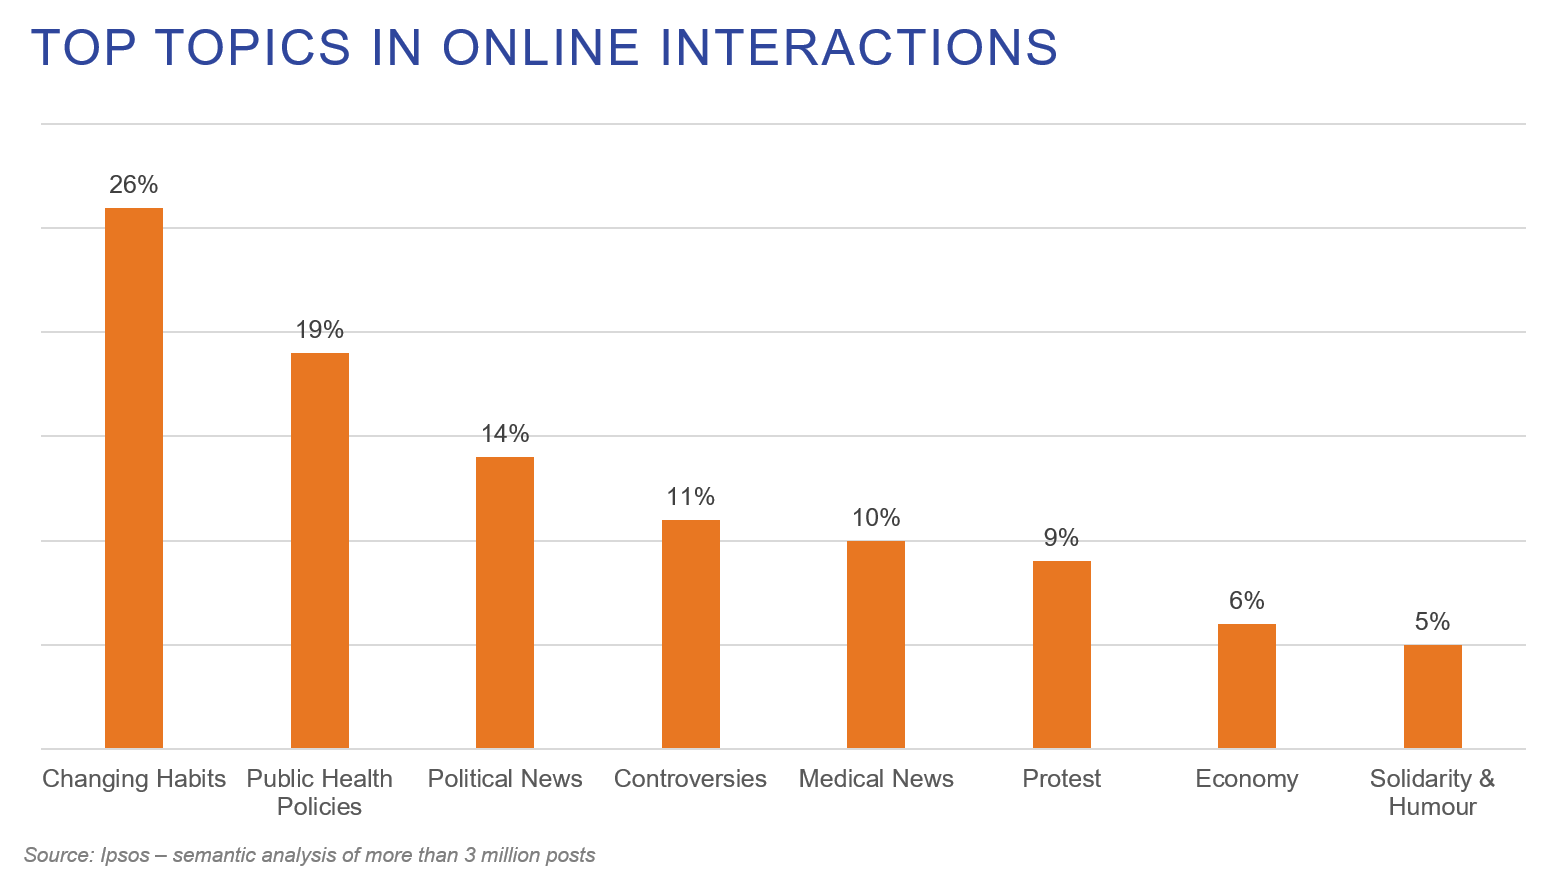 Changing habits are the prominent topic in online interactions, sometimes mentioned solemnly, sometimes with humour | Covid-19 and containment | Coronavirus | Ipsos | France